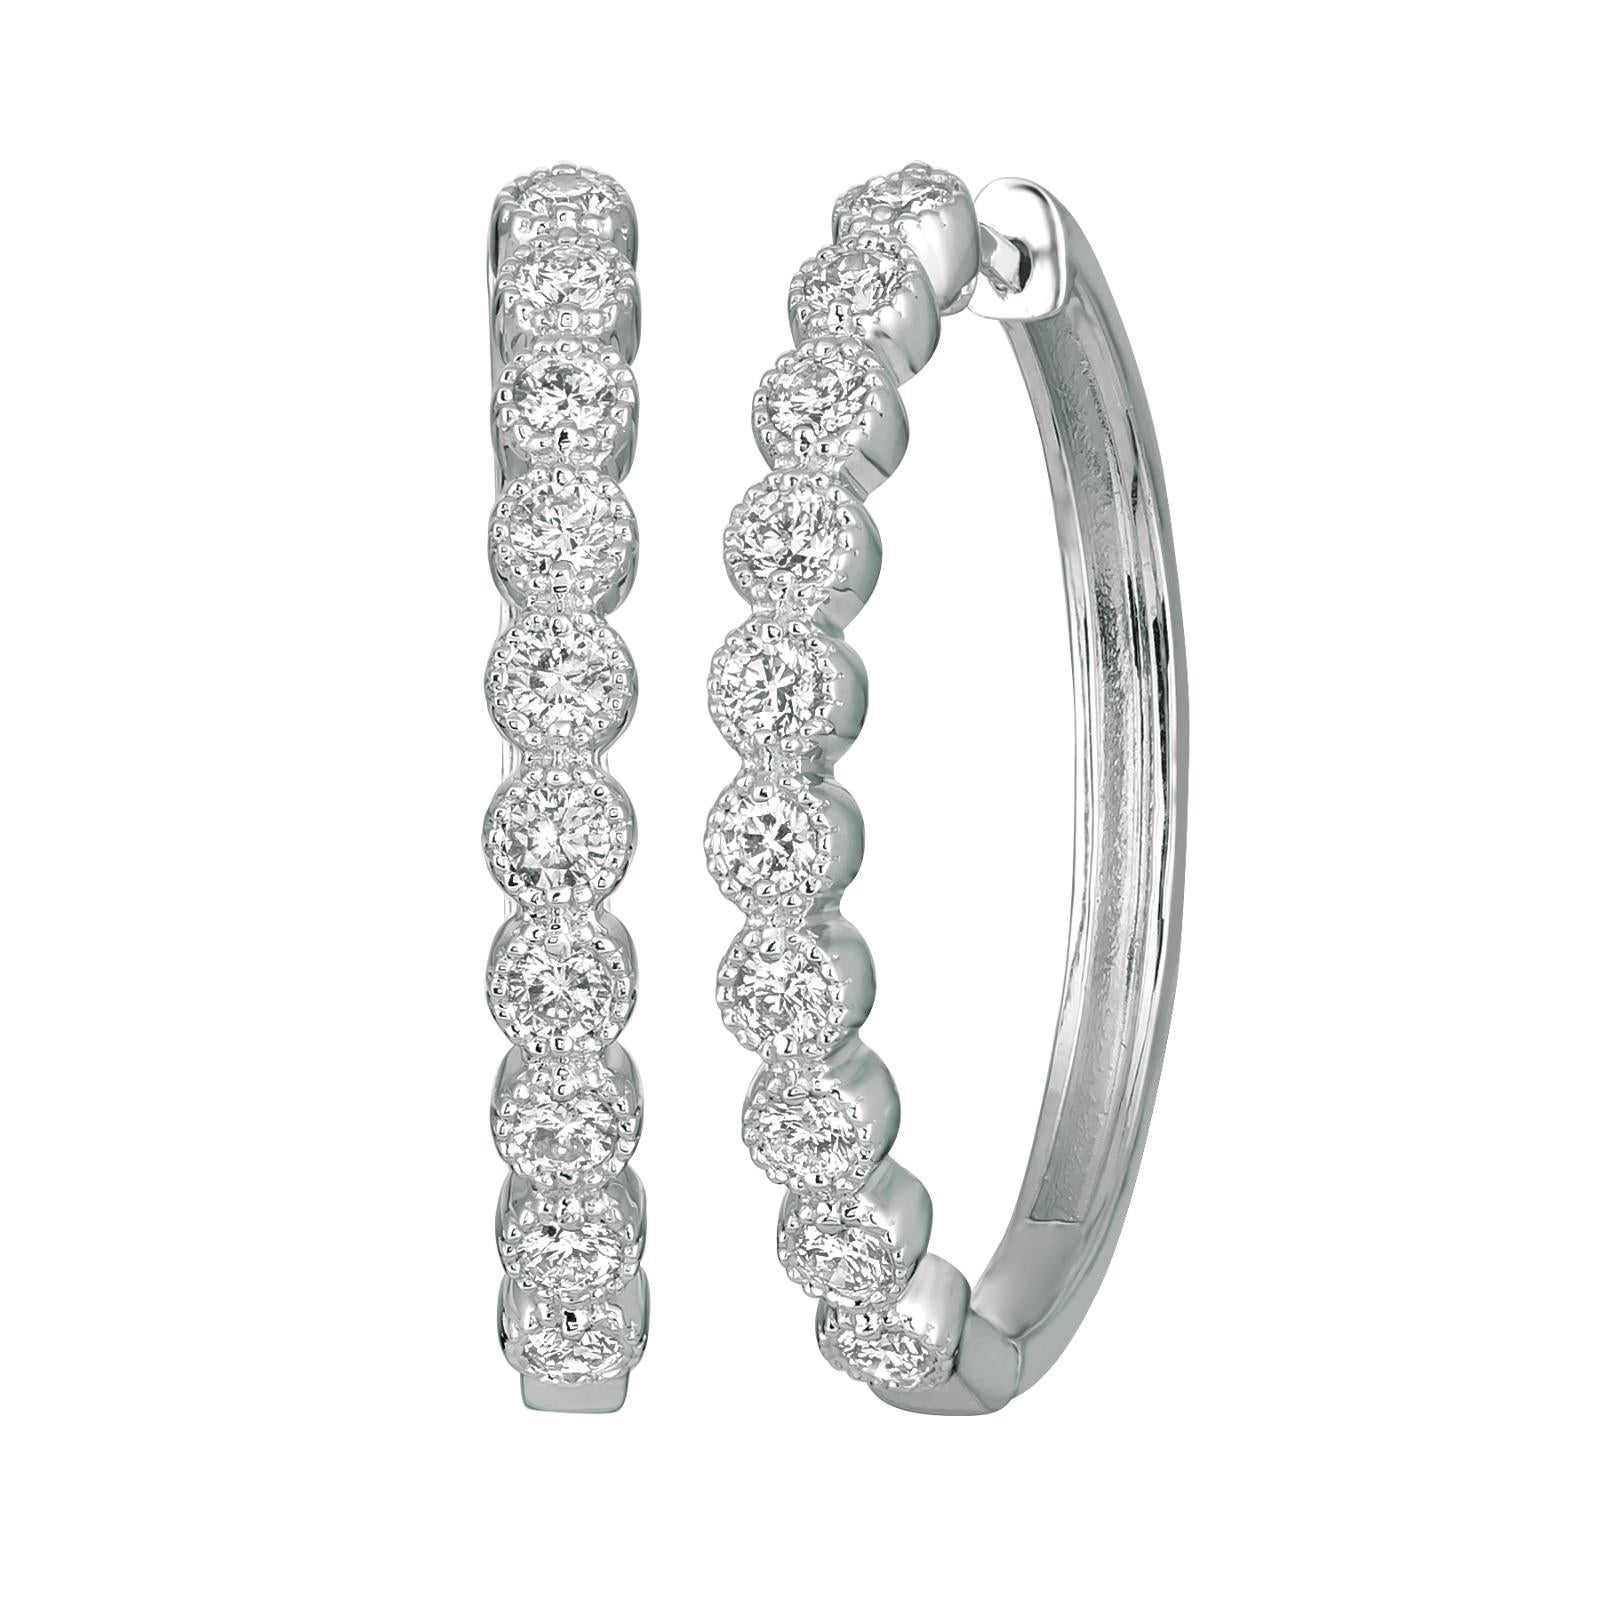 1.00 Carat Natural Diamond Oval Hoop Earrings G SI 14K Yellow Gold

100% Natural, Not Enhanced in any way Round Cut Diamond Earrings
1.00CT
G-H 
SI  
14K Yellow Gold  6.2 grams, burnish style 
1 1/8 inches in length, 1/8 inches in width
20